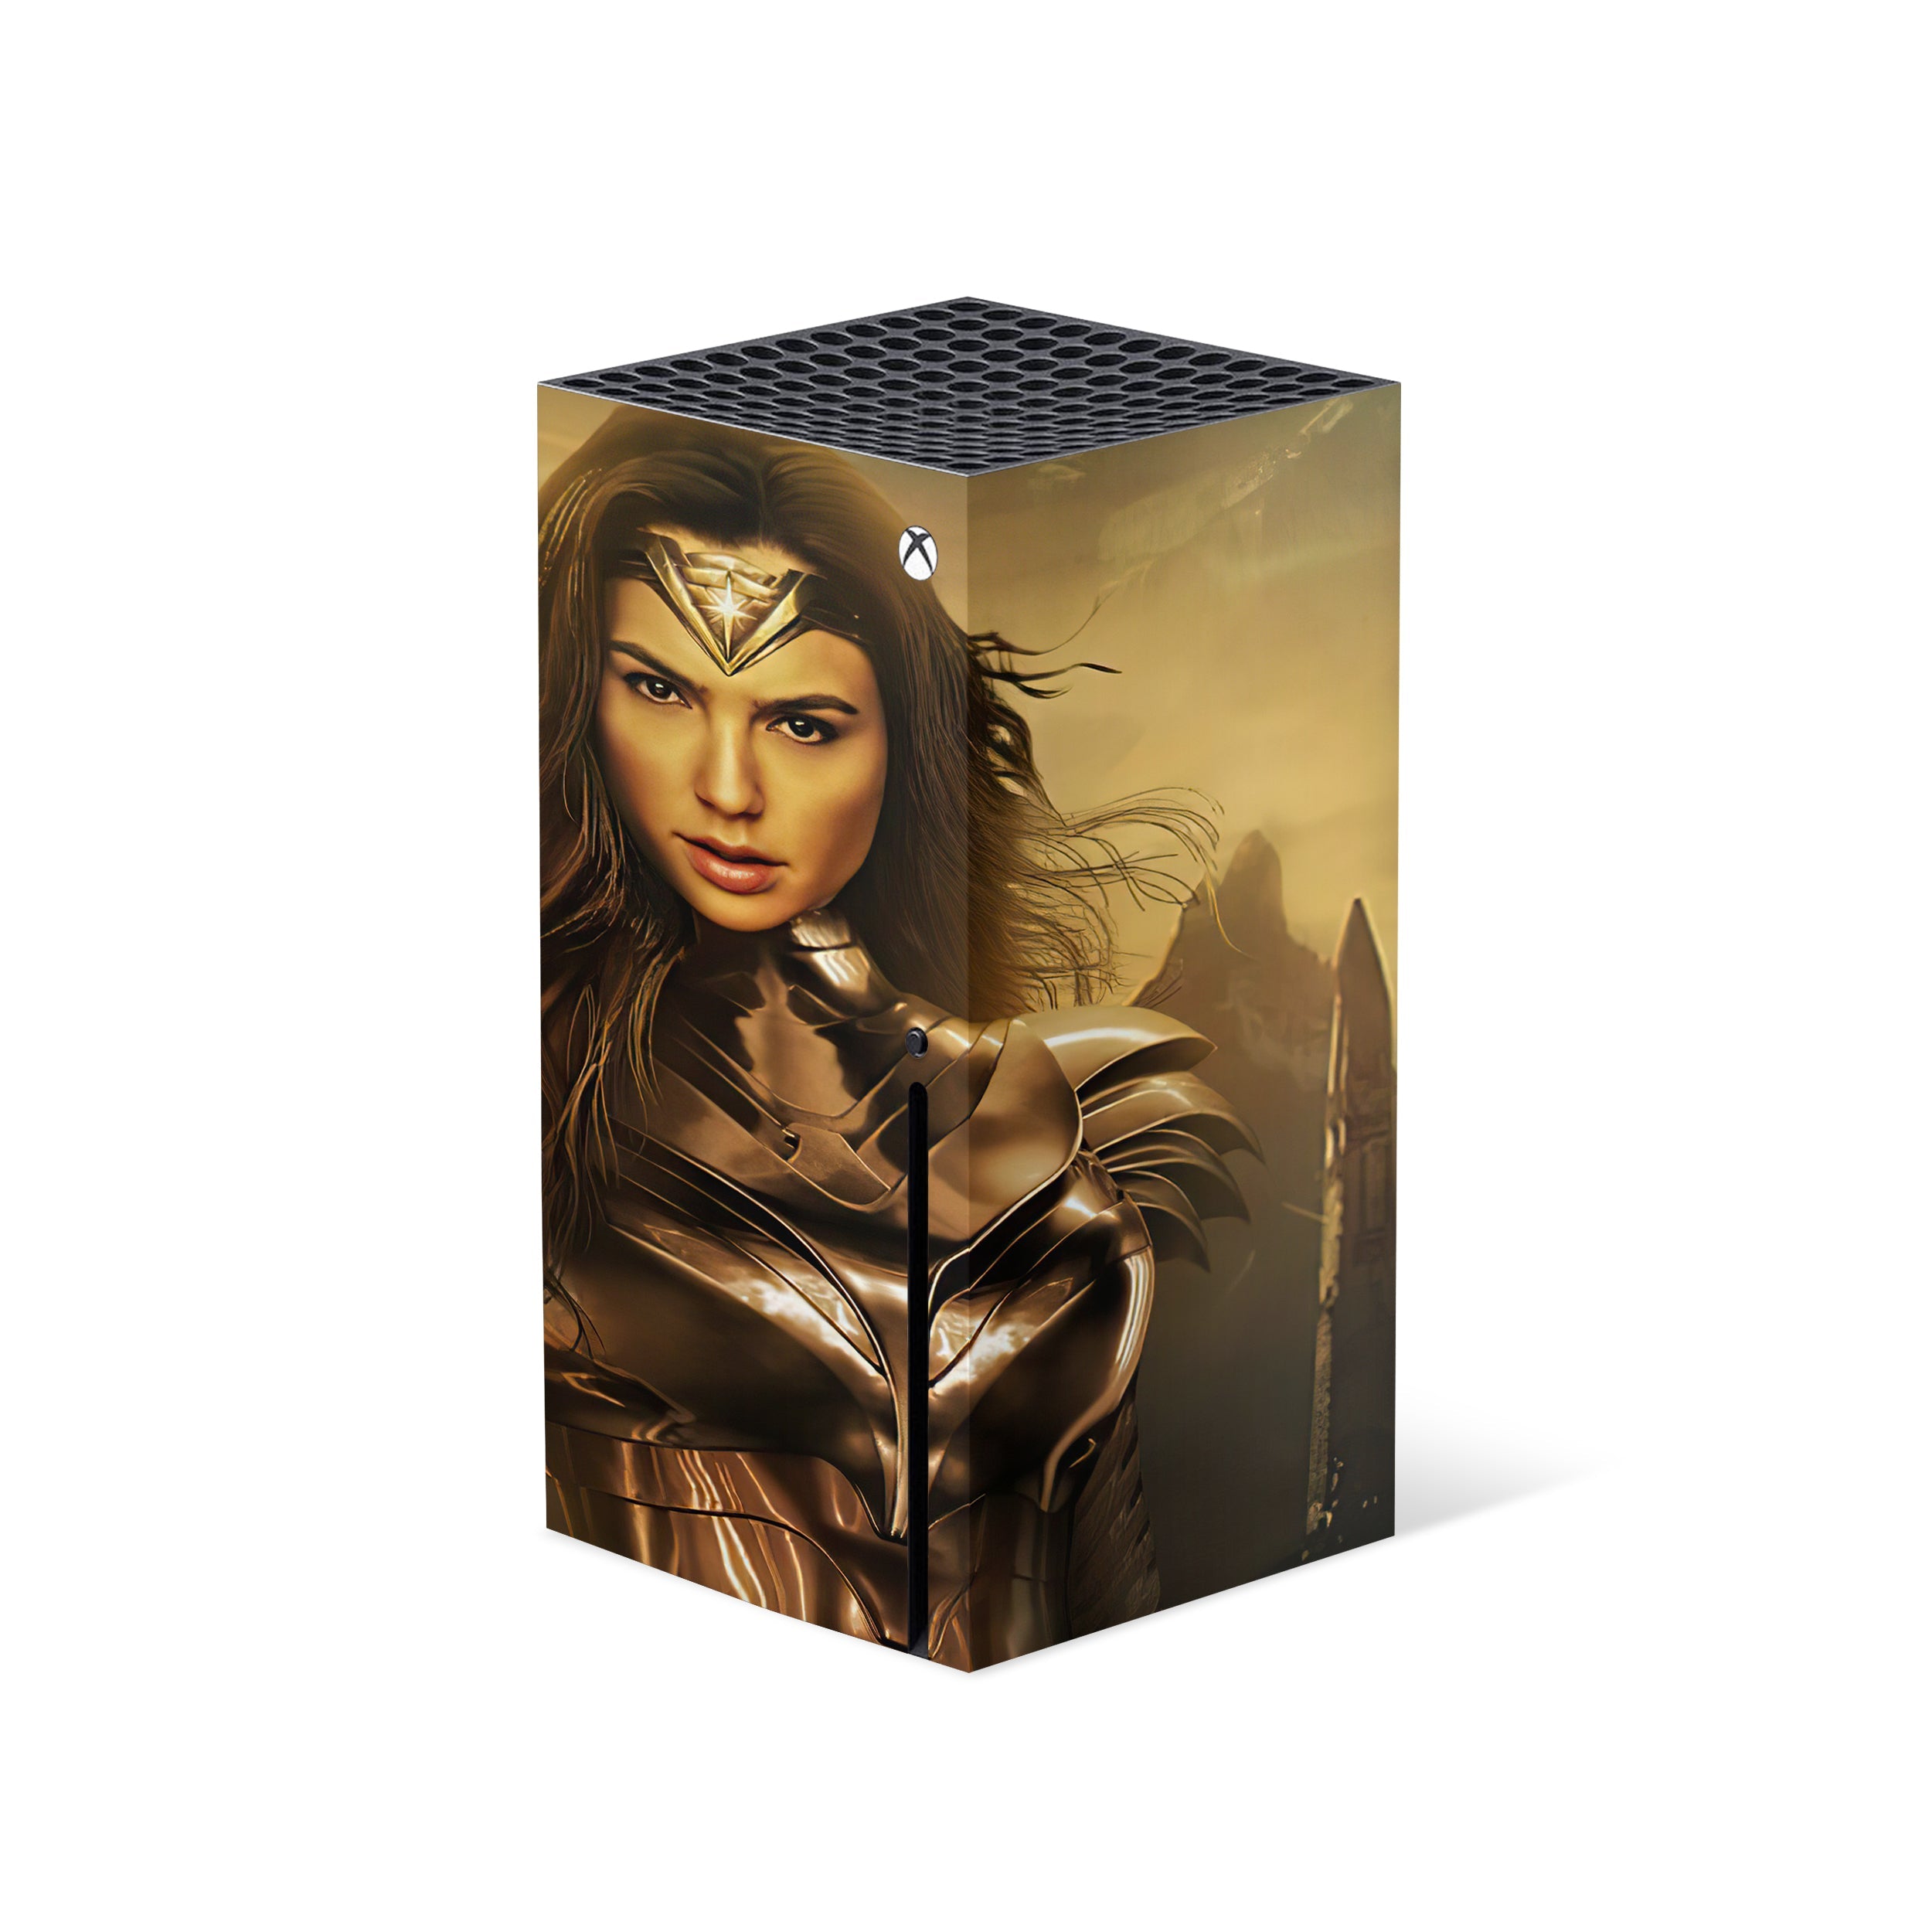 A video game skin featuring a DC Comics Wonder Woman design for the Xbox Series X.